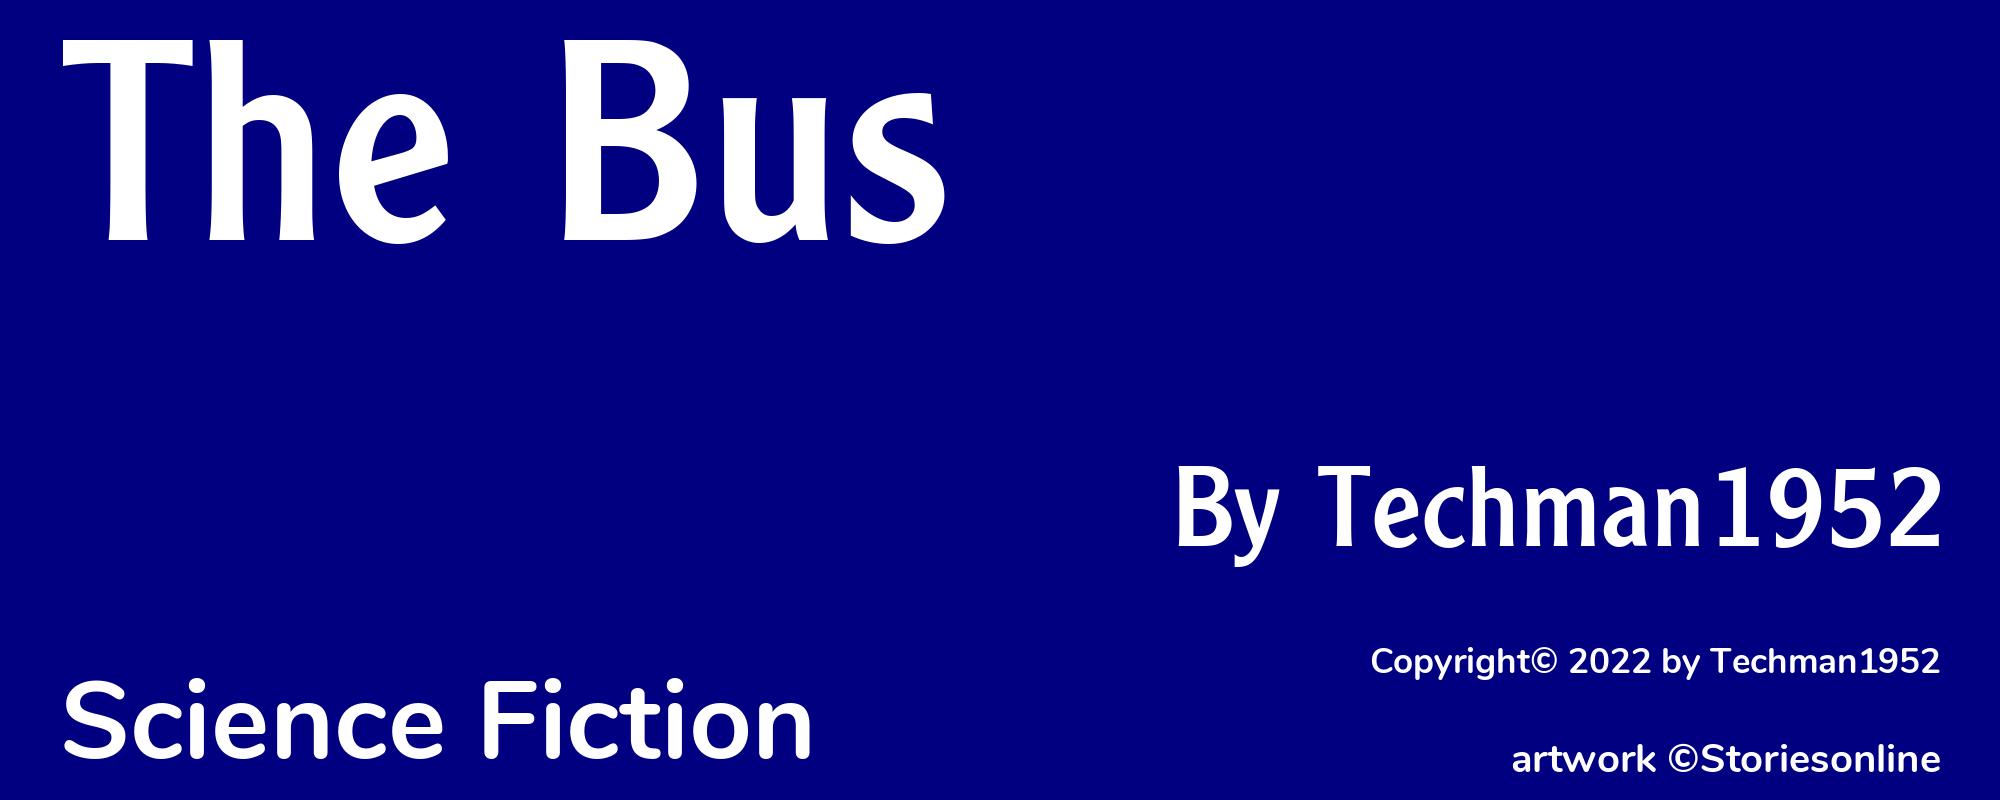 The Bus - Cover